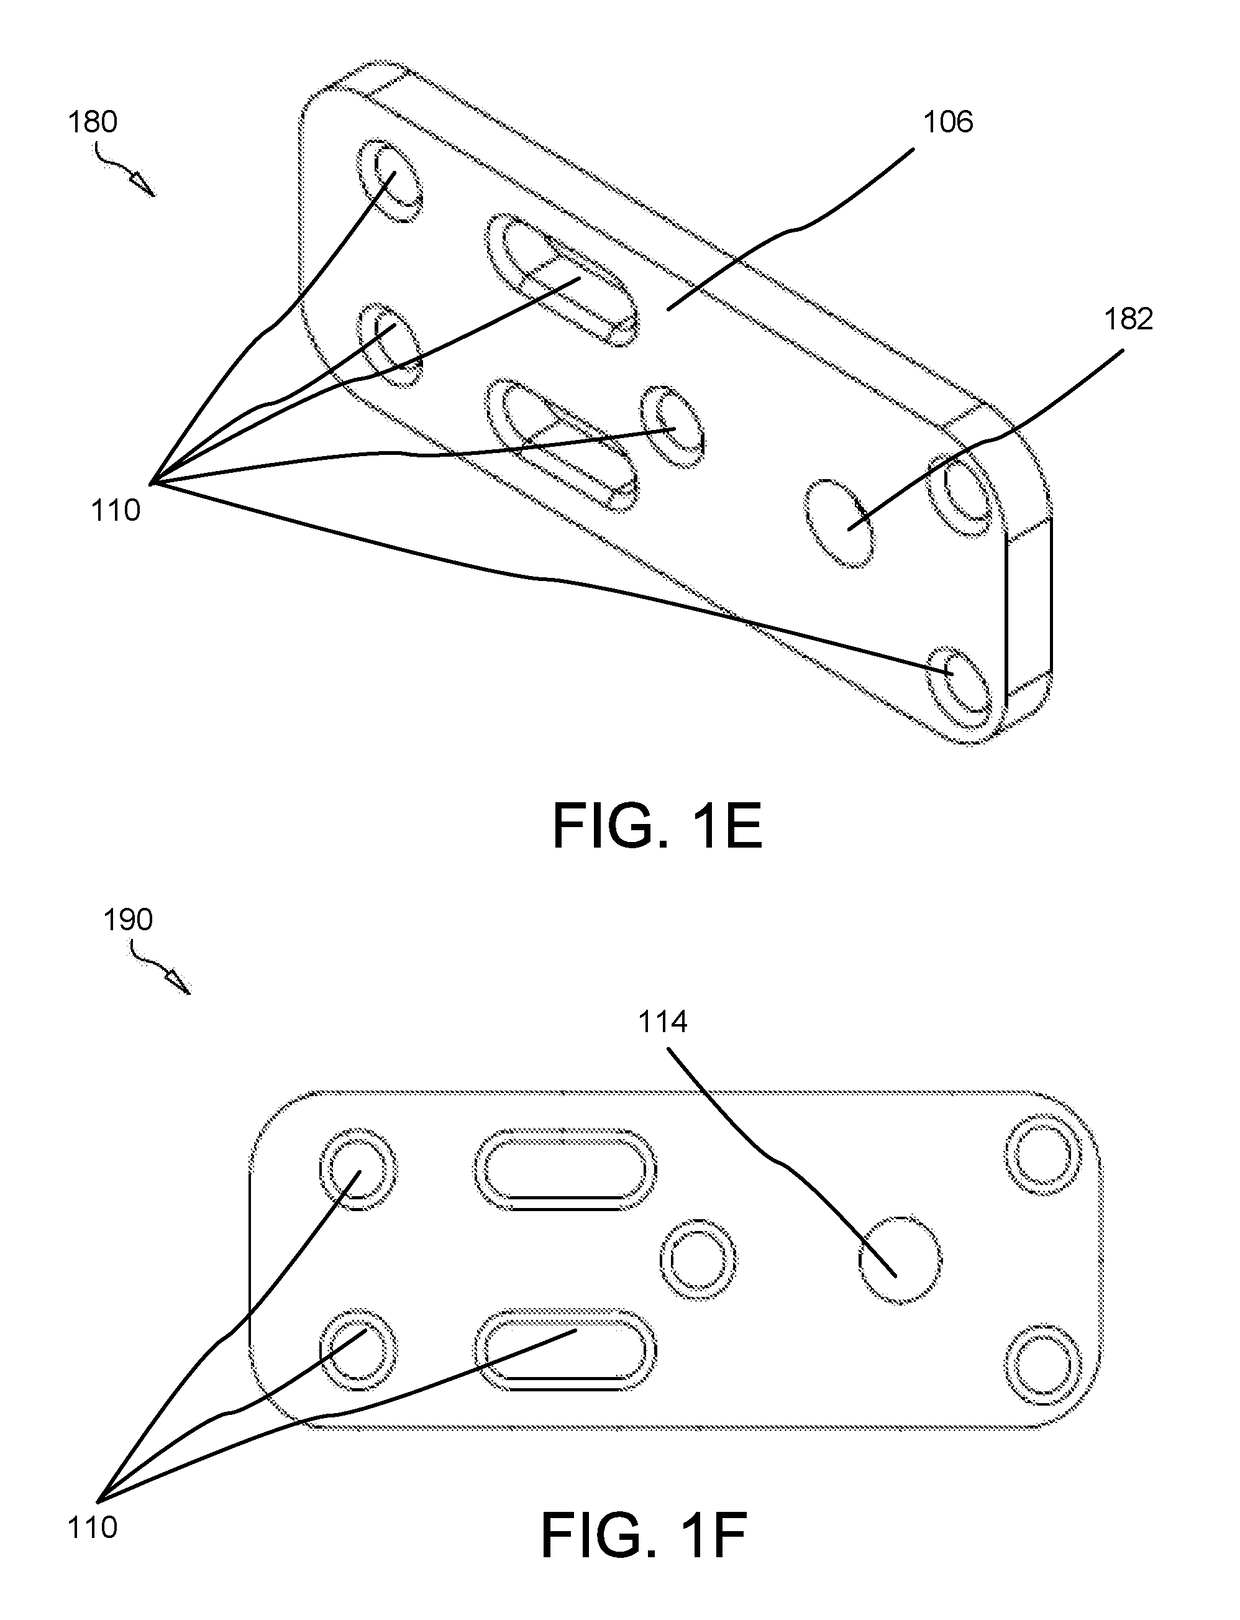 Playless hinge system with releasable hinge pin